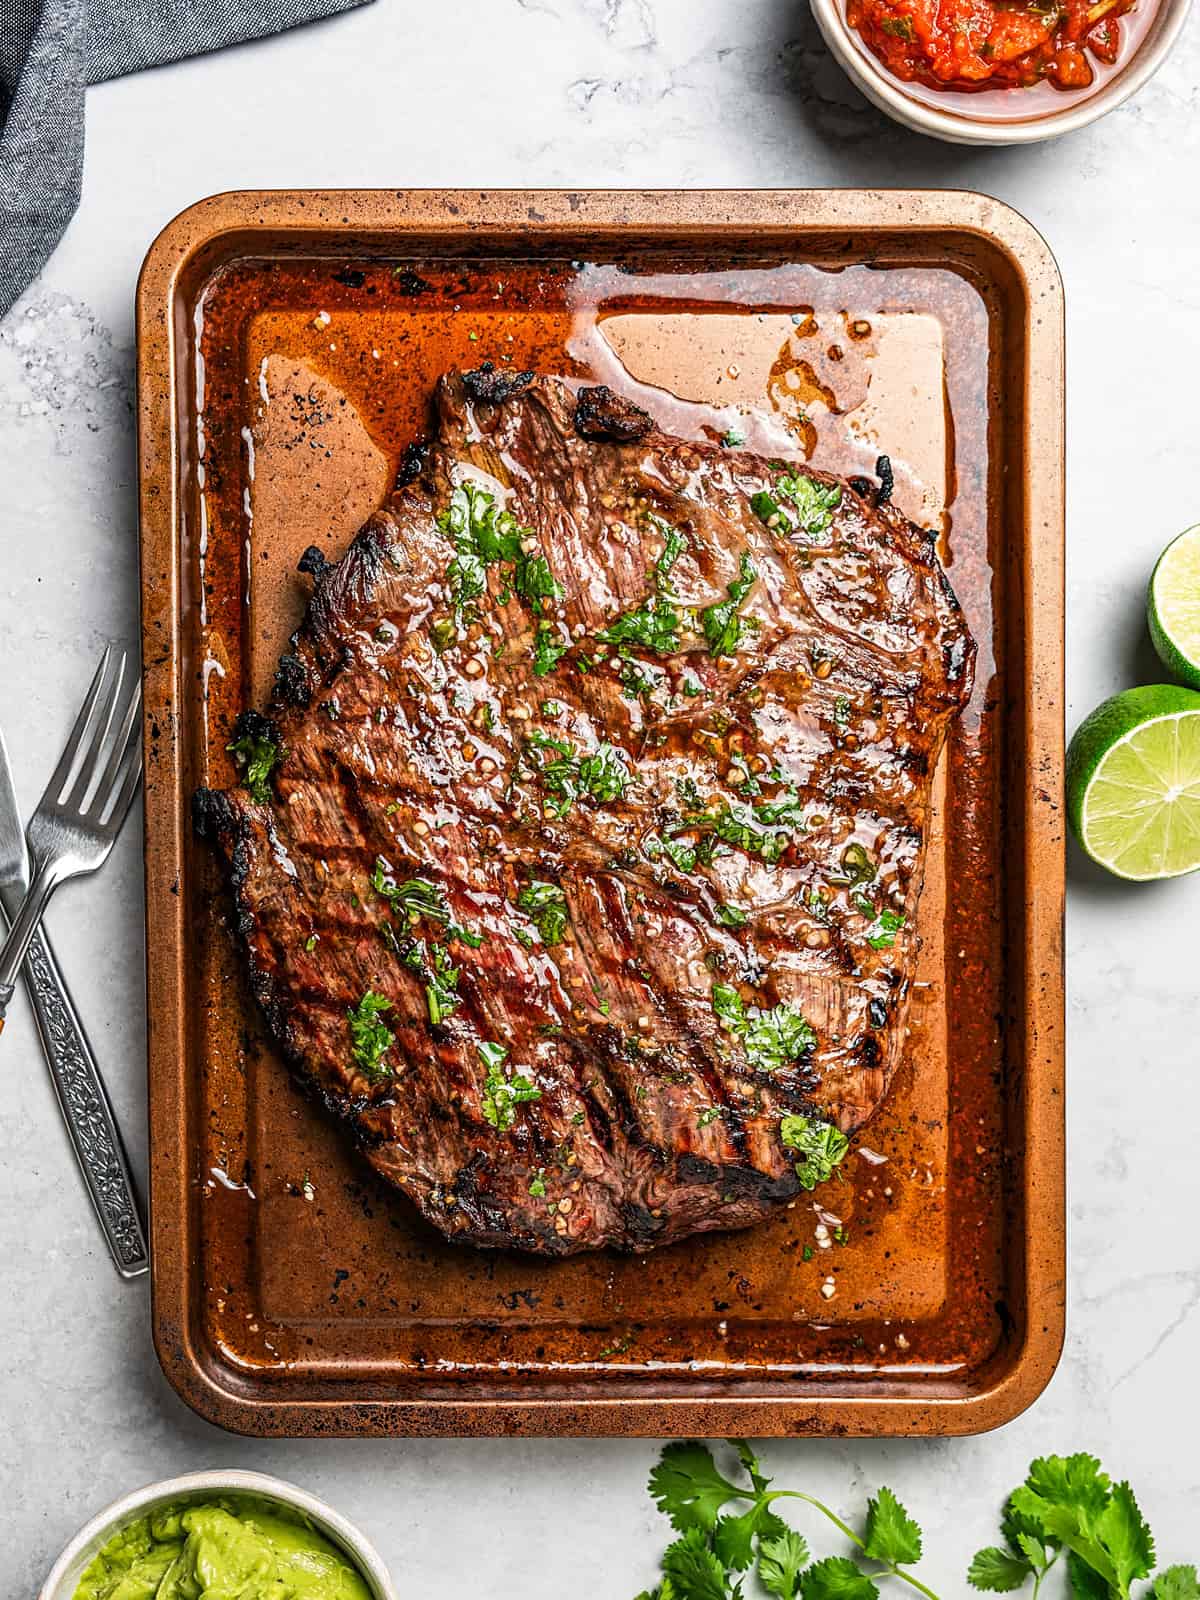 A whole grilled flank steak set on a rimmed baking sheet.